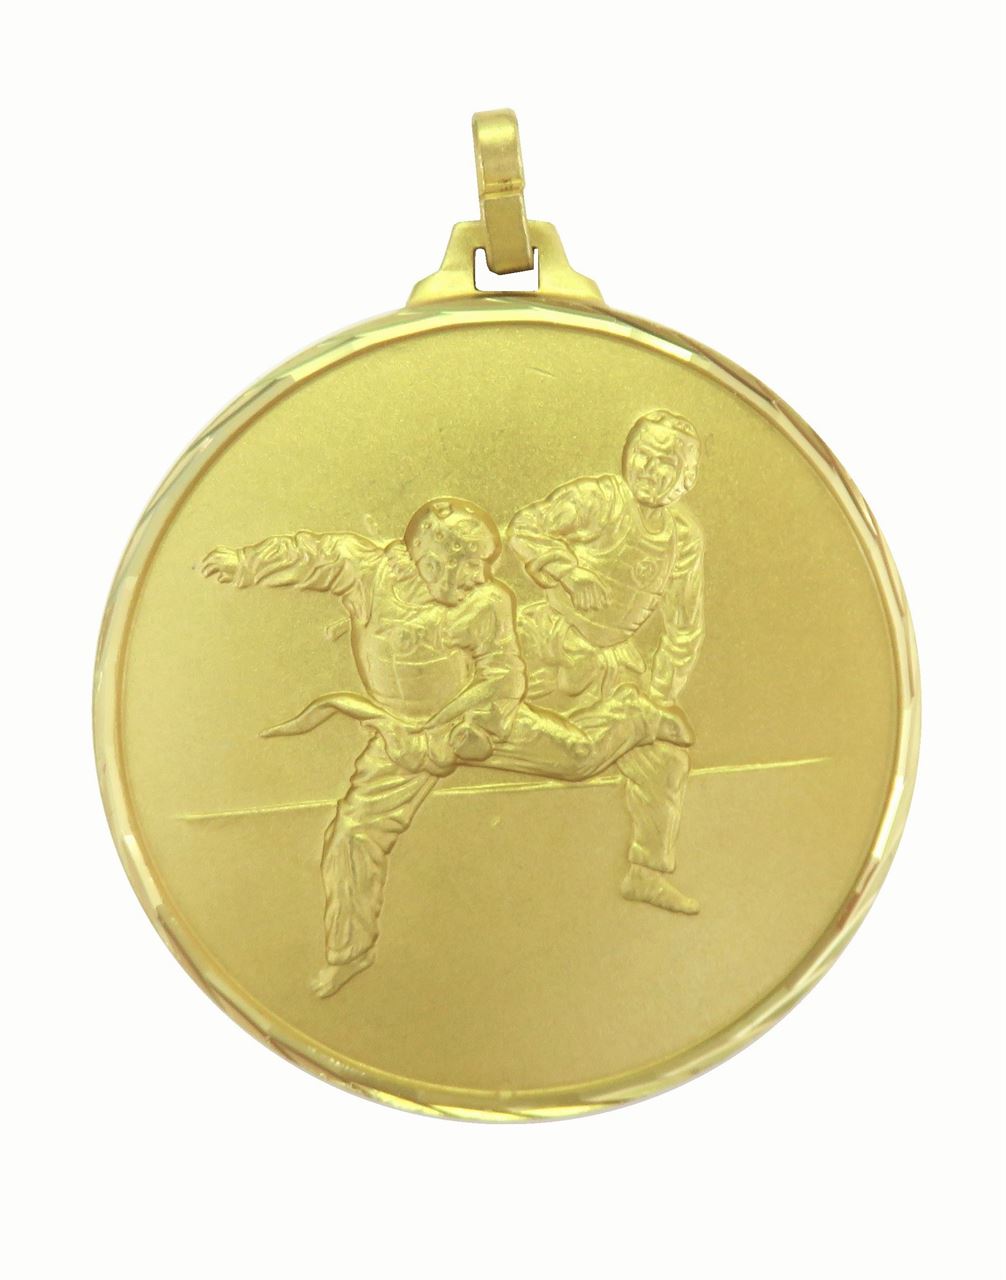 Gold Faceted Martial Arts Medal (size: 52mm) - CL-125F